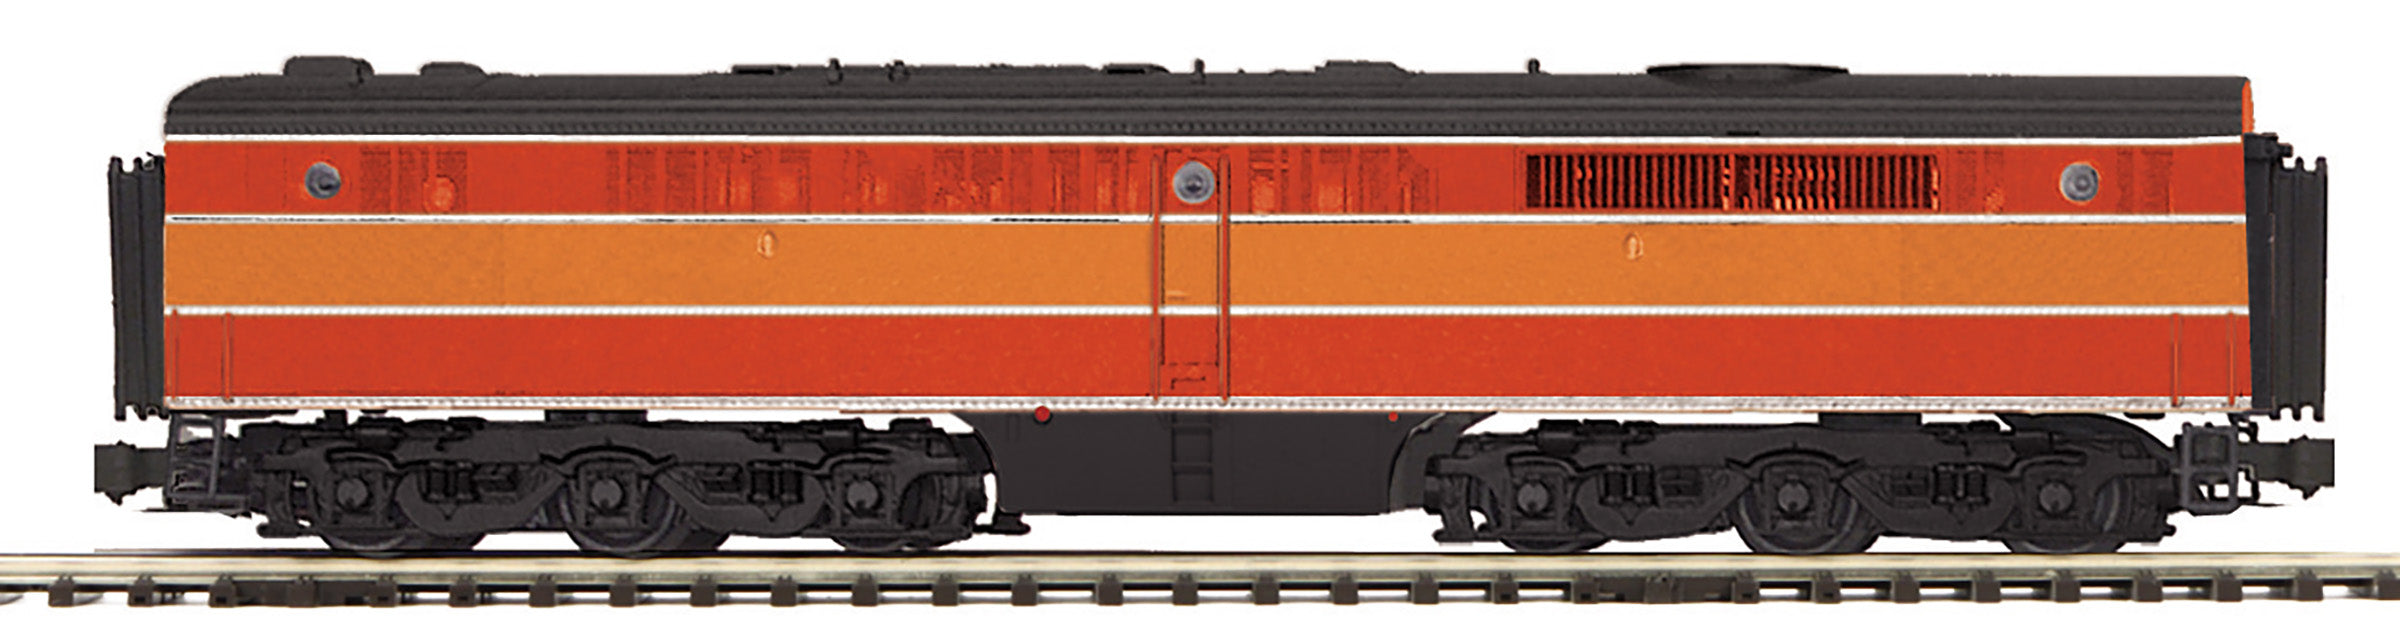 MTH 20-21868-3 - Alco PA B Unit Diesel Locomotive "Southern Pacific" #6012 w/ PS3 (Non-Powered) Daylight